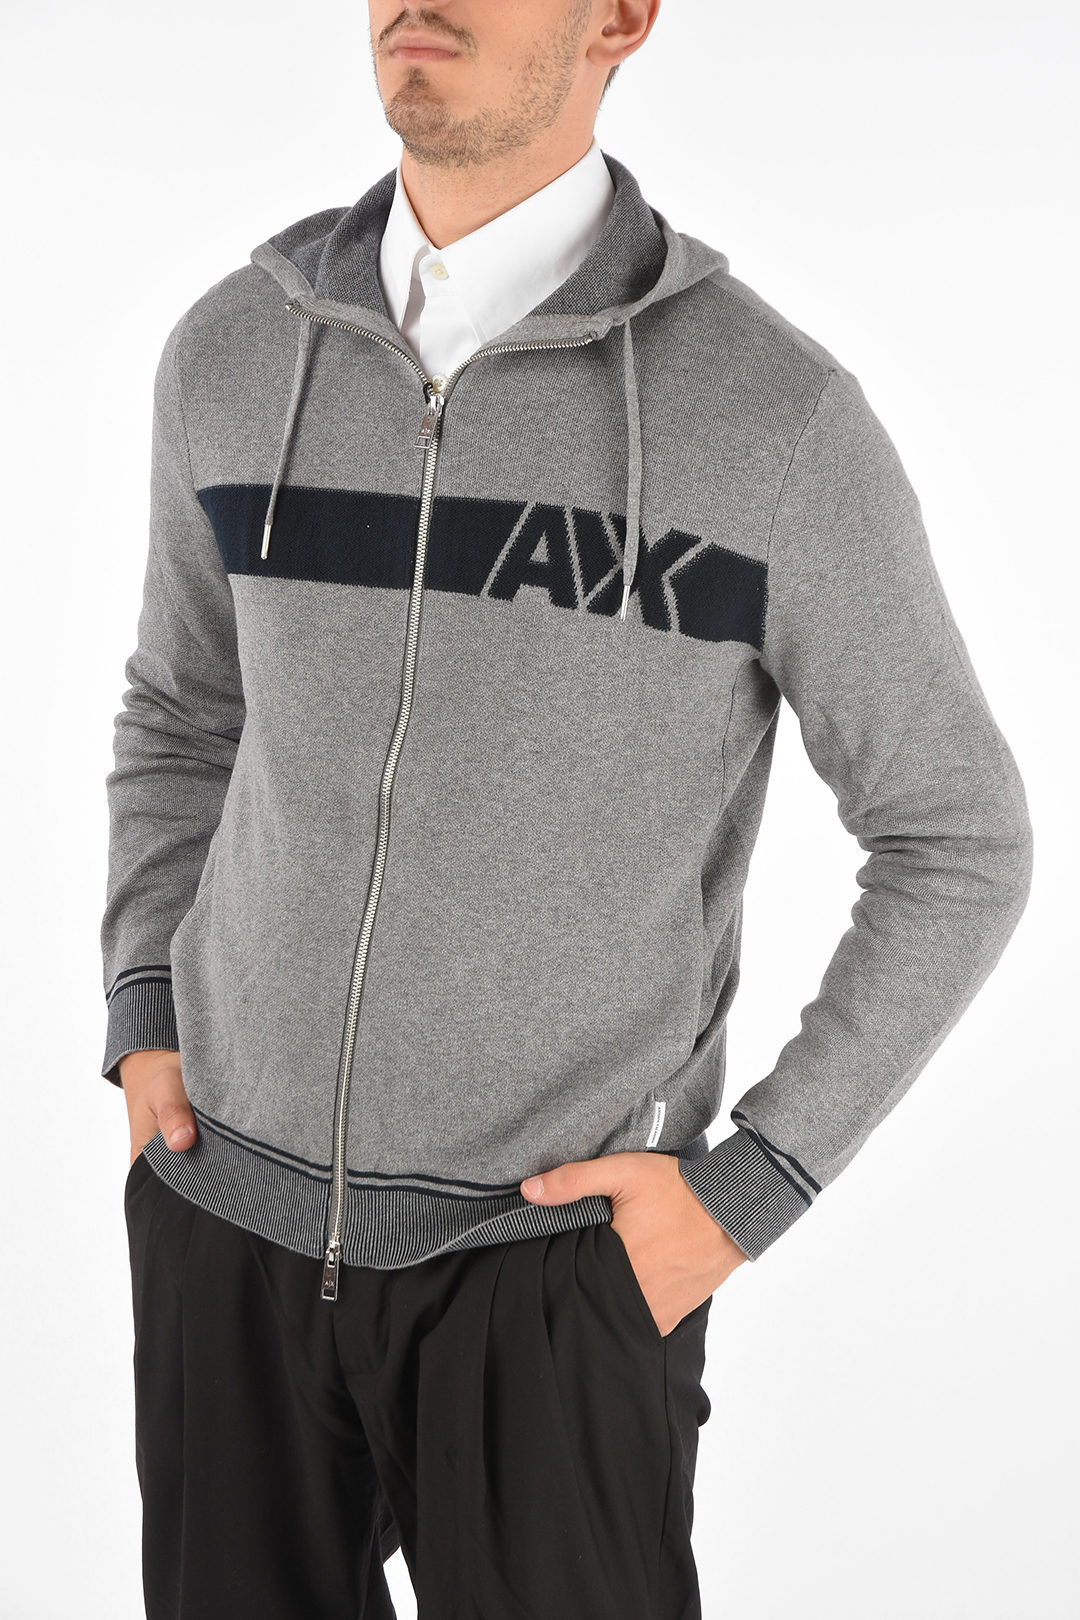 Armani Exchange Pullover Hoodie Sales Cheapest, Save 70% 